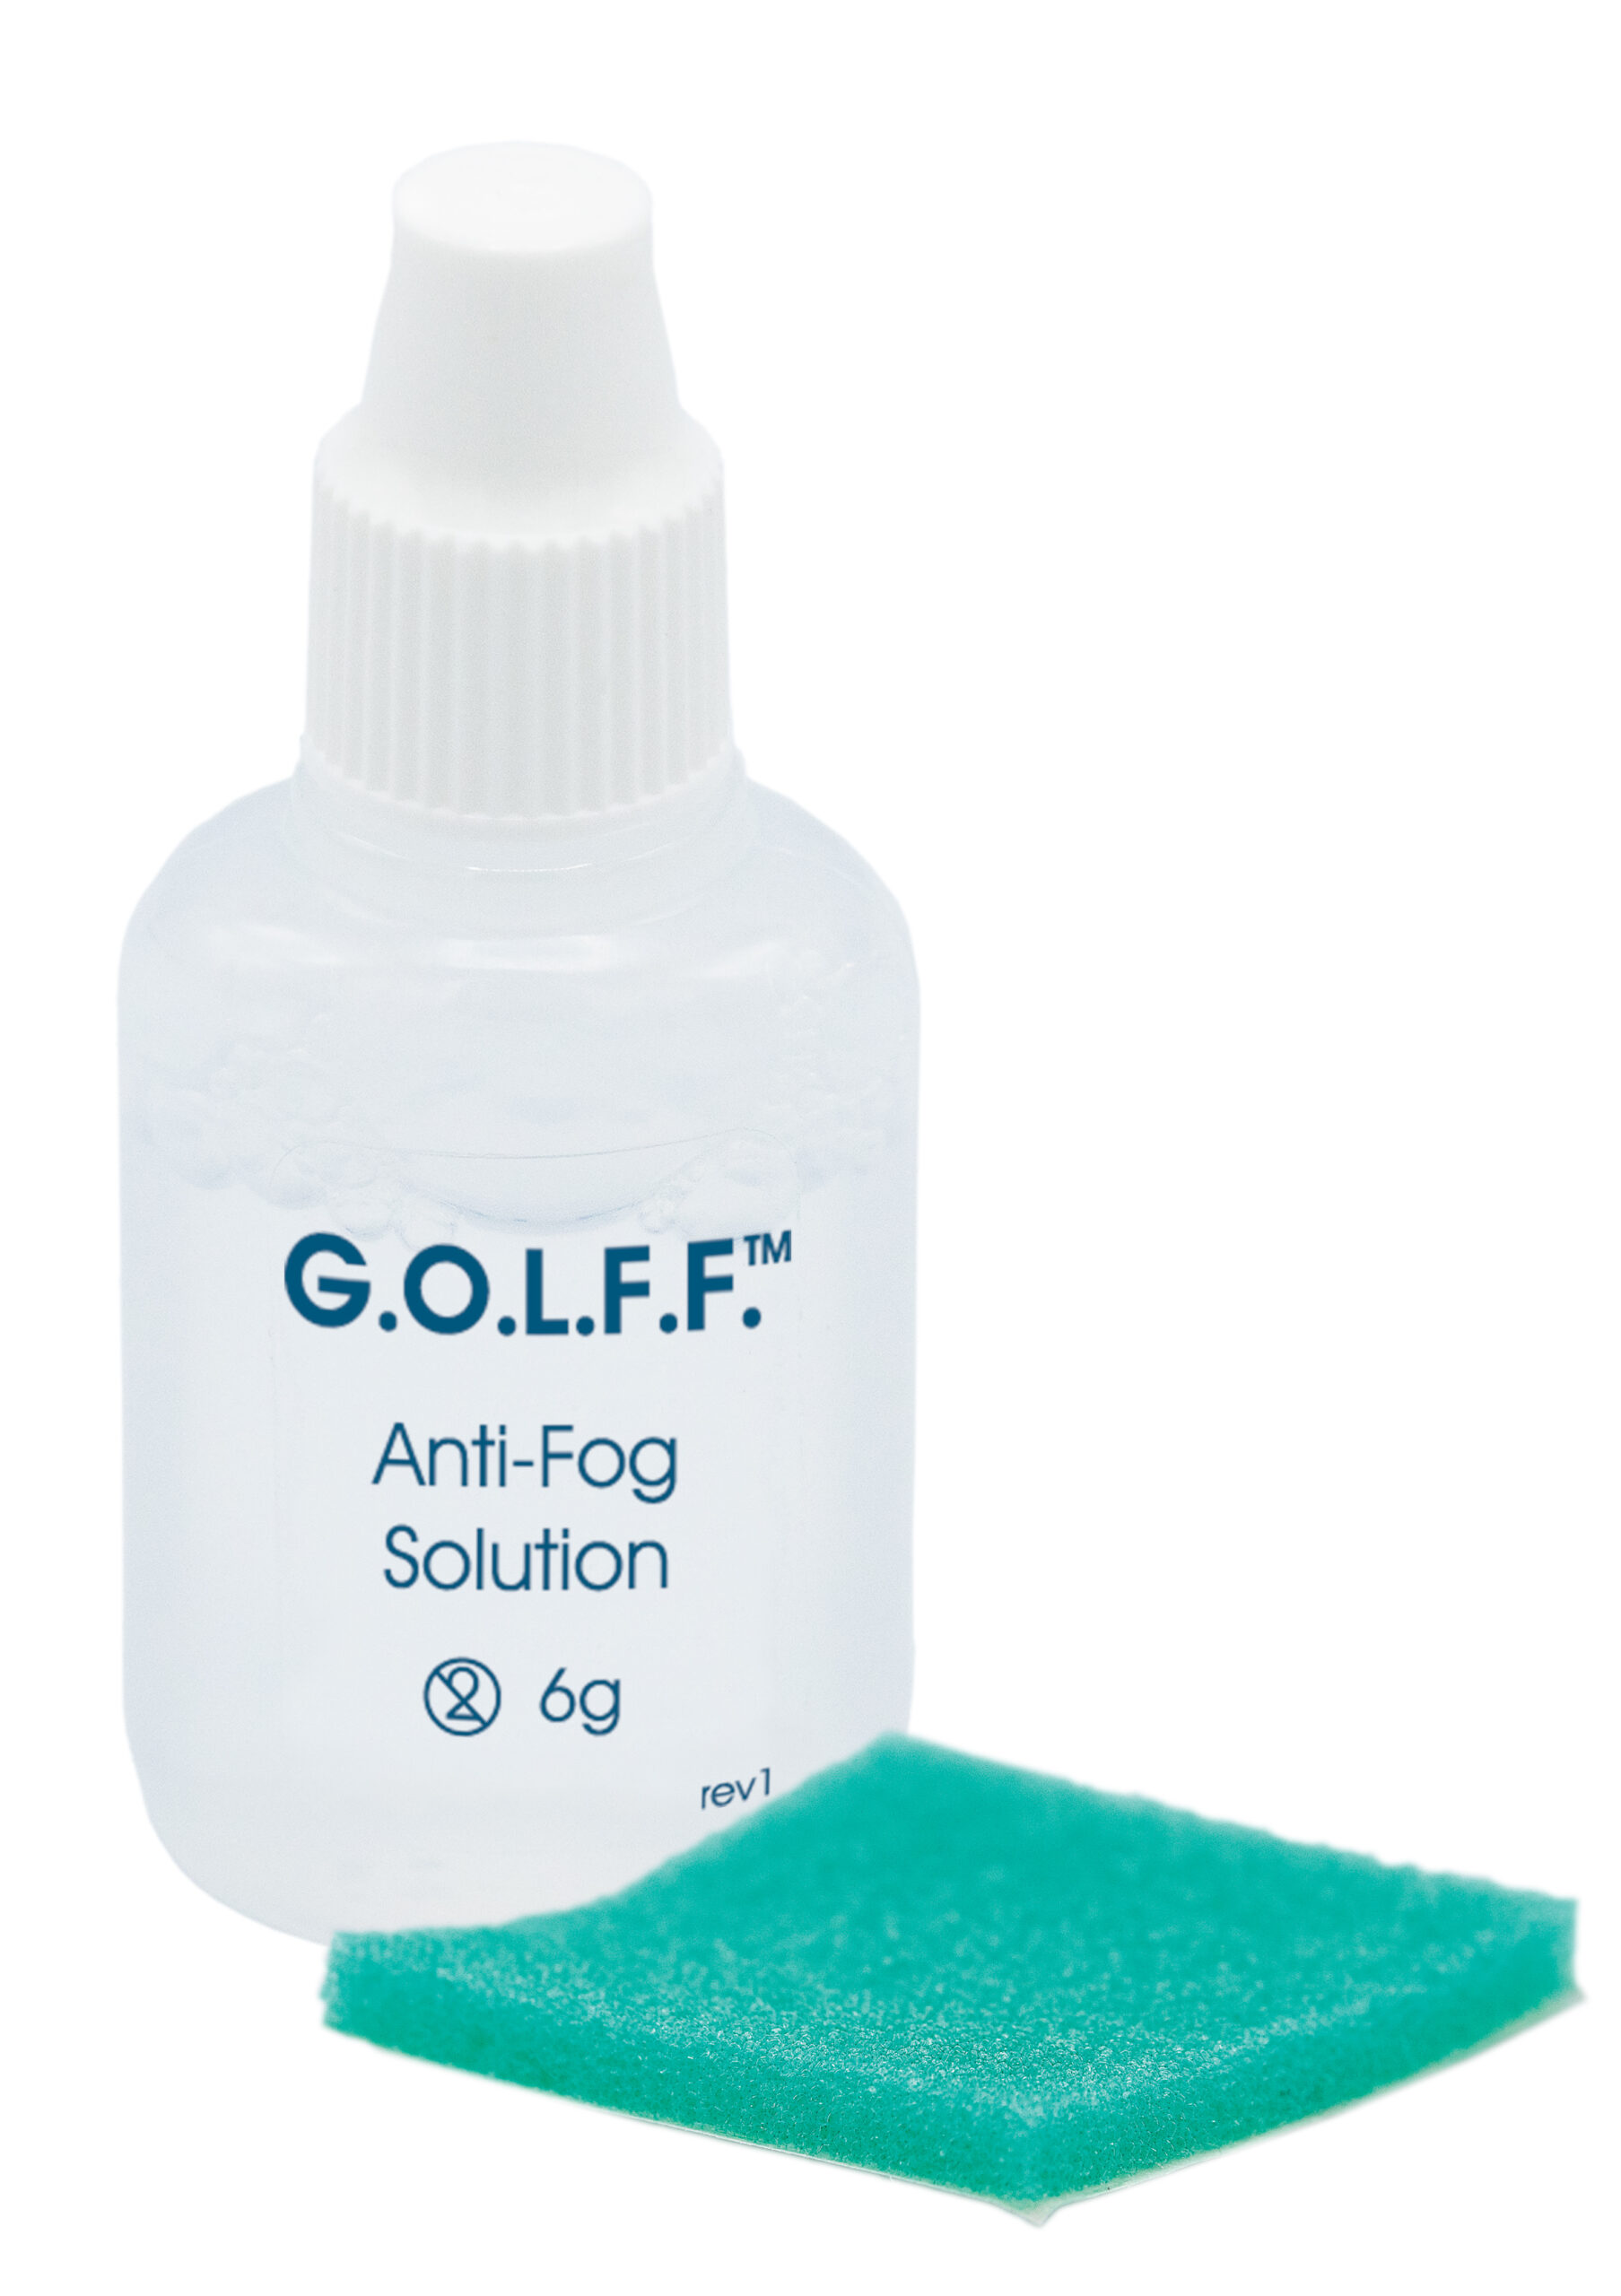 G.O.L.F.F.™ Anti-Fog Solution with Sponge - Surgmed Group